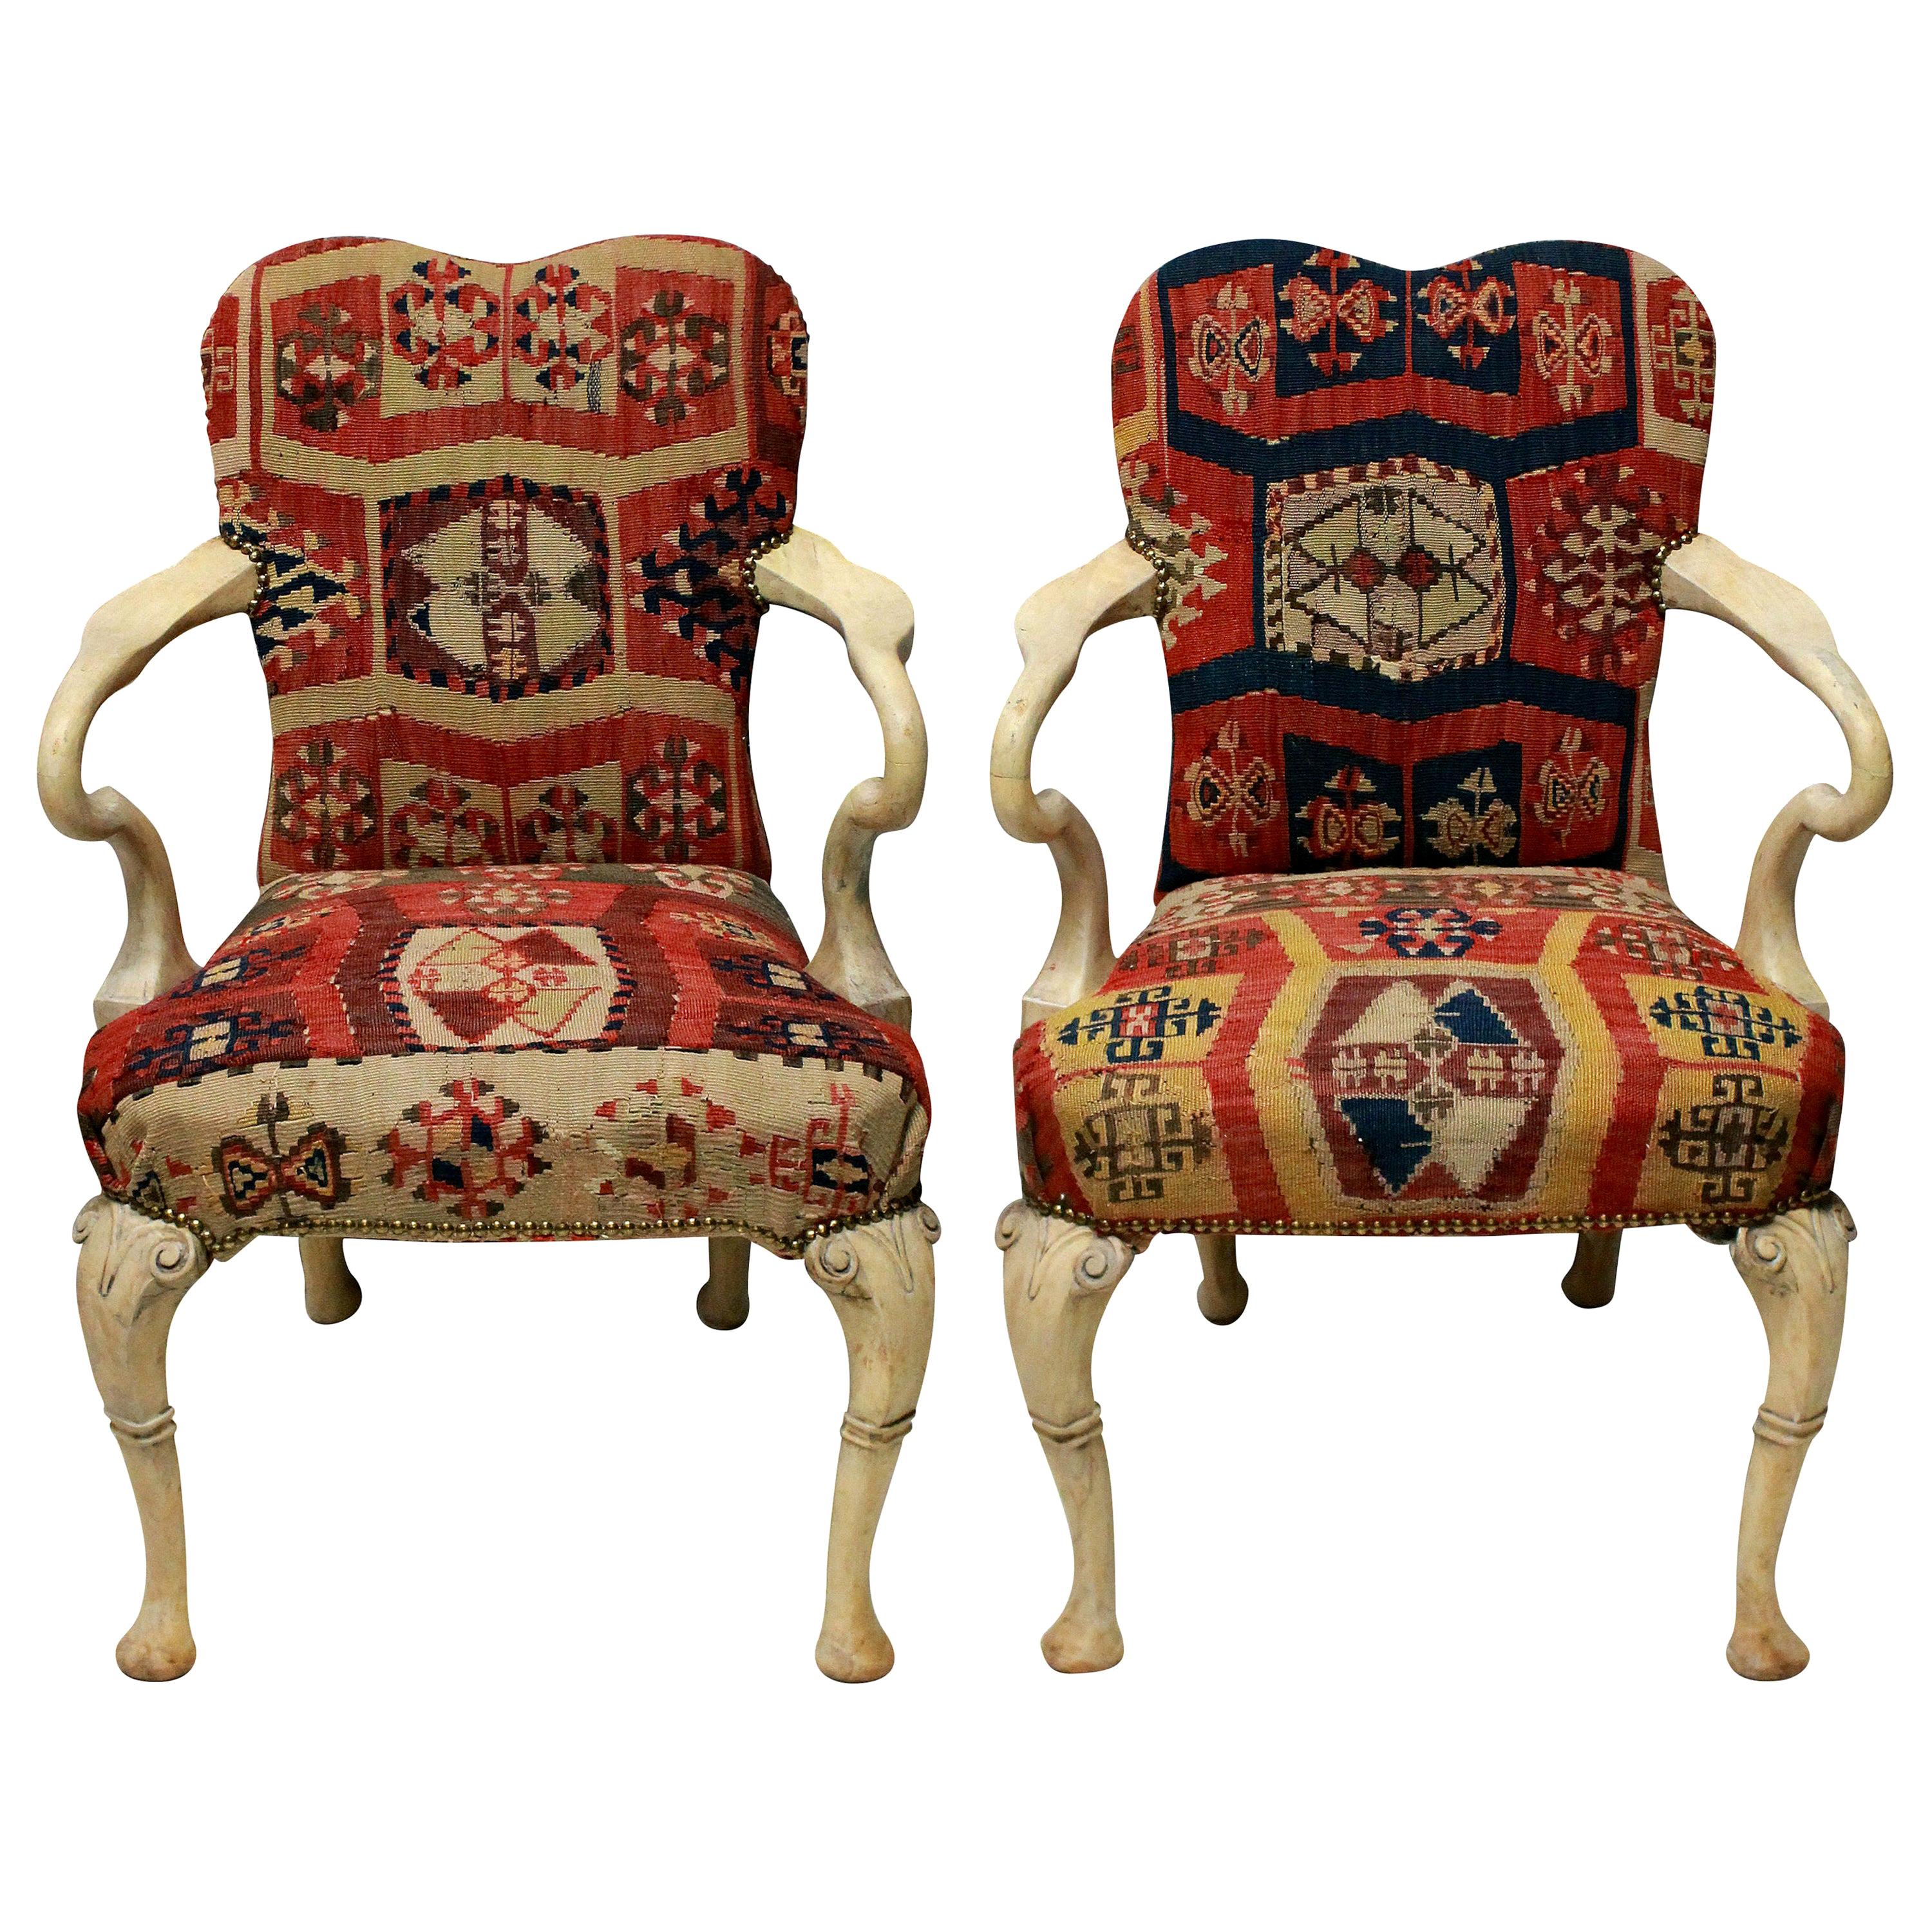 Pair of Syrie Maugham Style Pickled Armchairs in Kilims